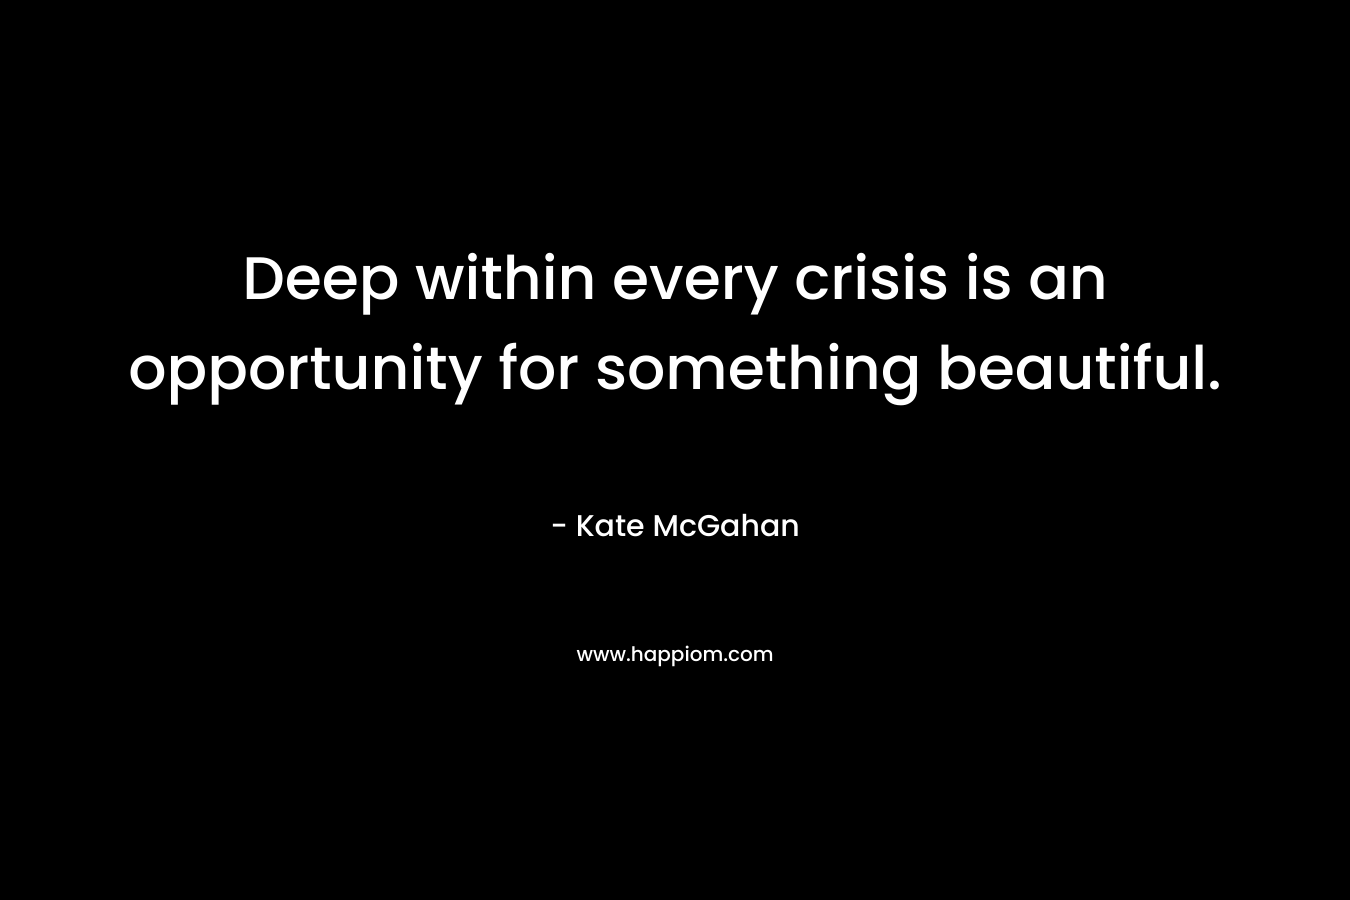 Deep within every crisis is an opportunity for something beautiful.